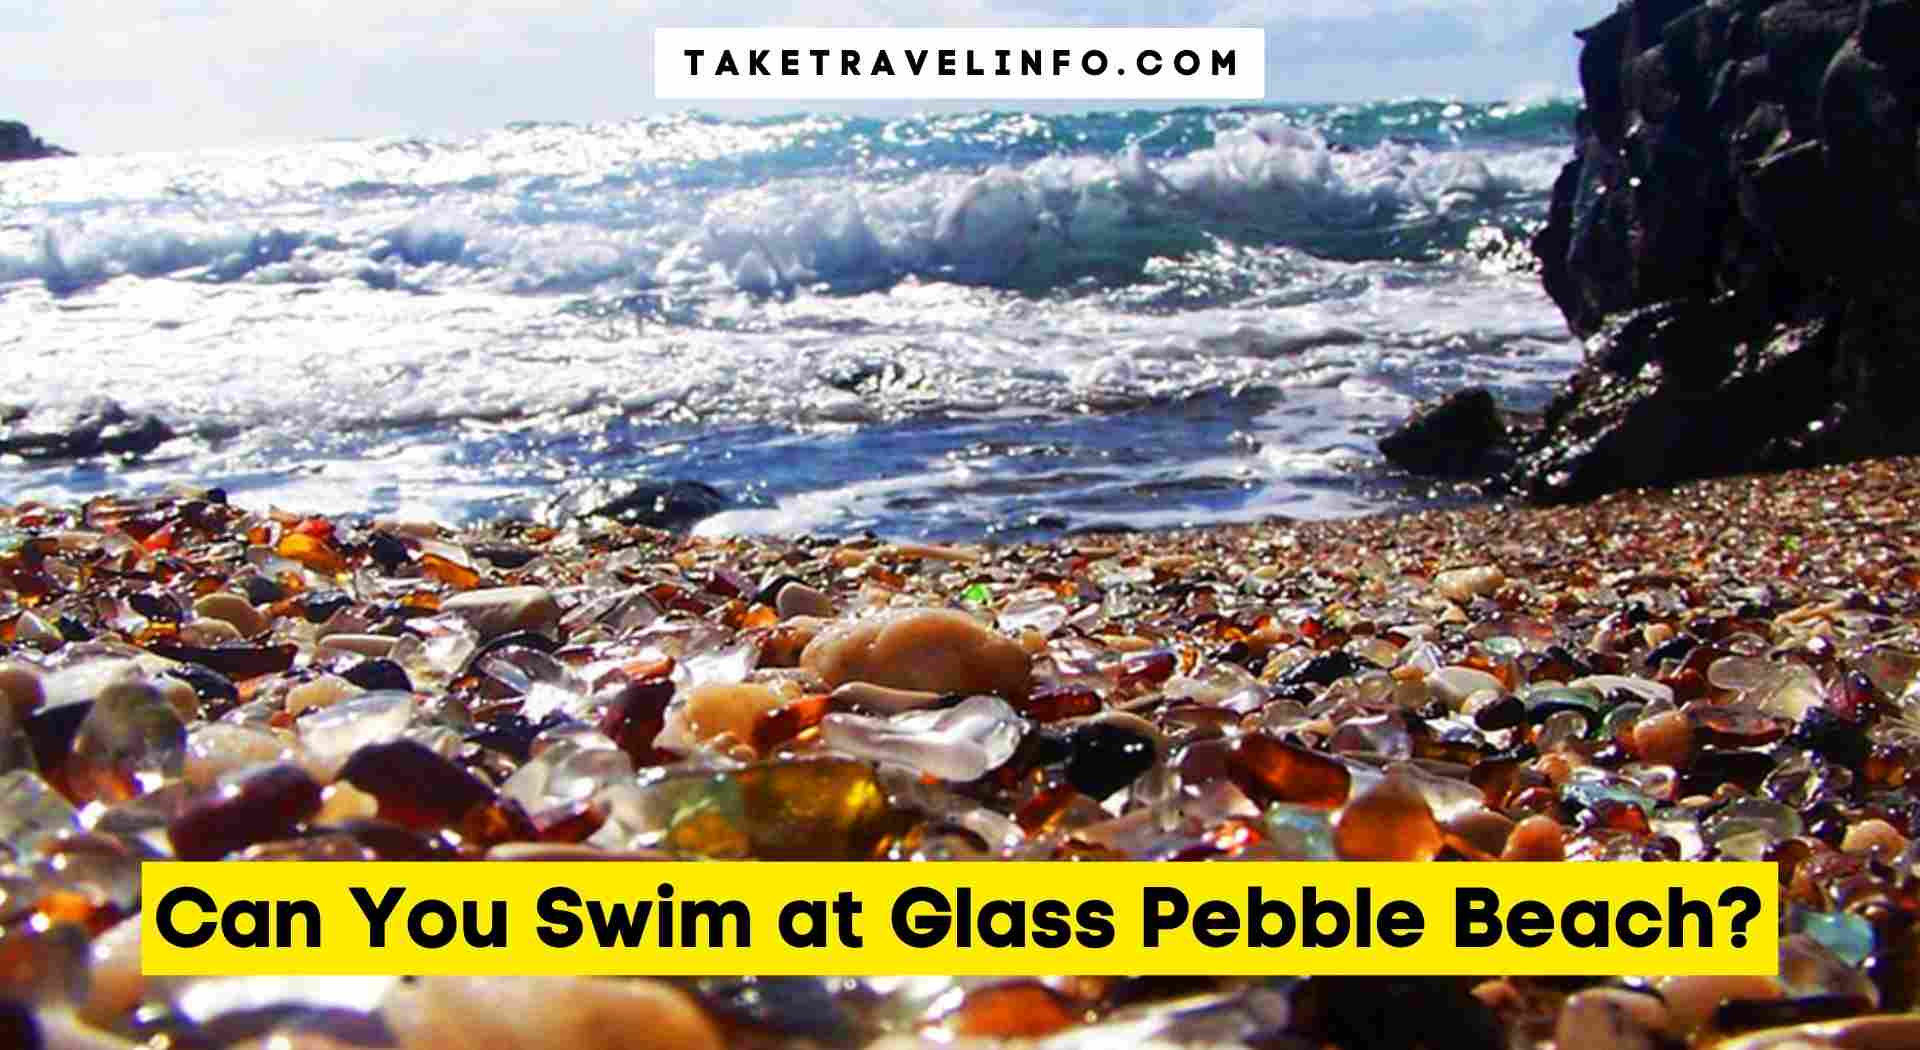 Can You Swim at Glass Pebble Beach?